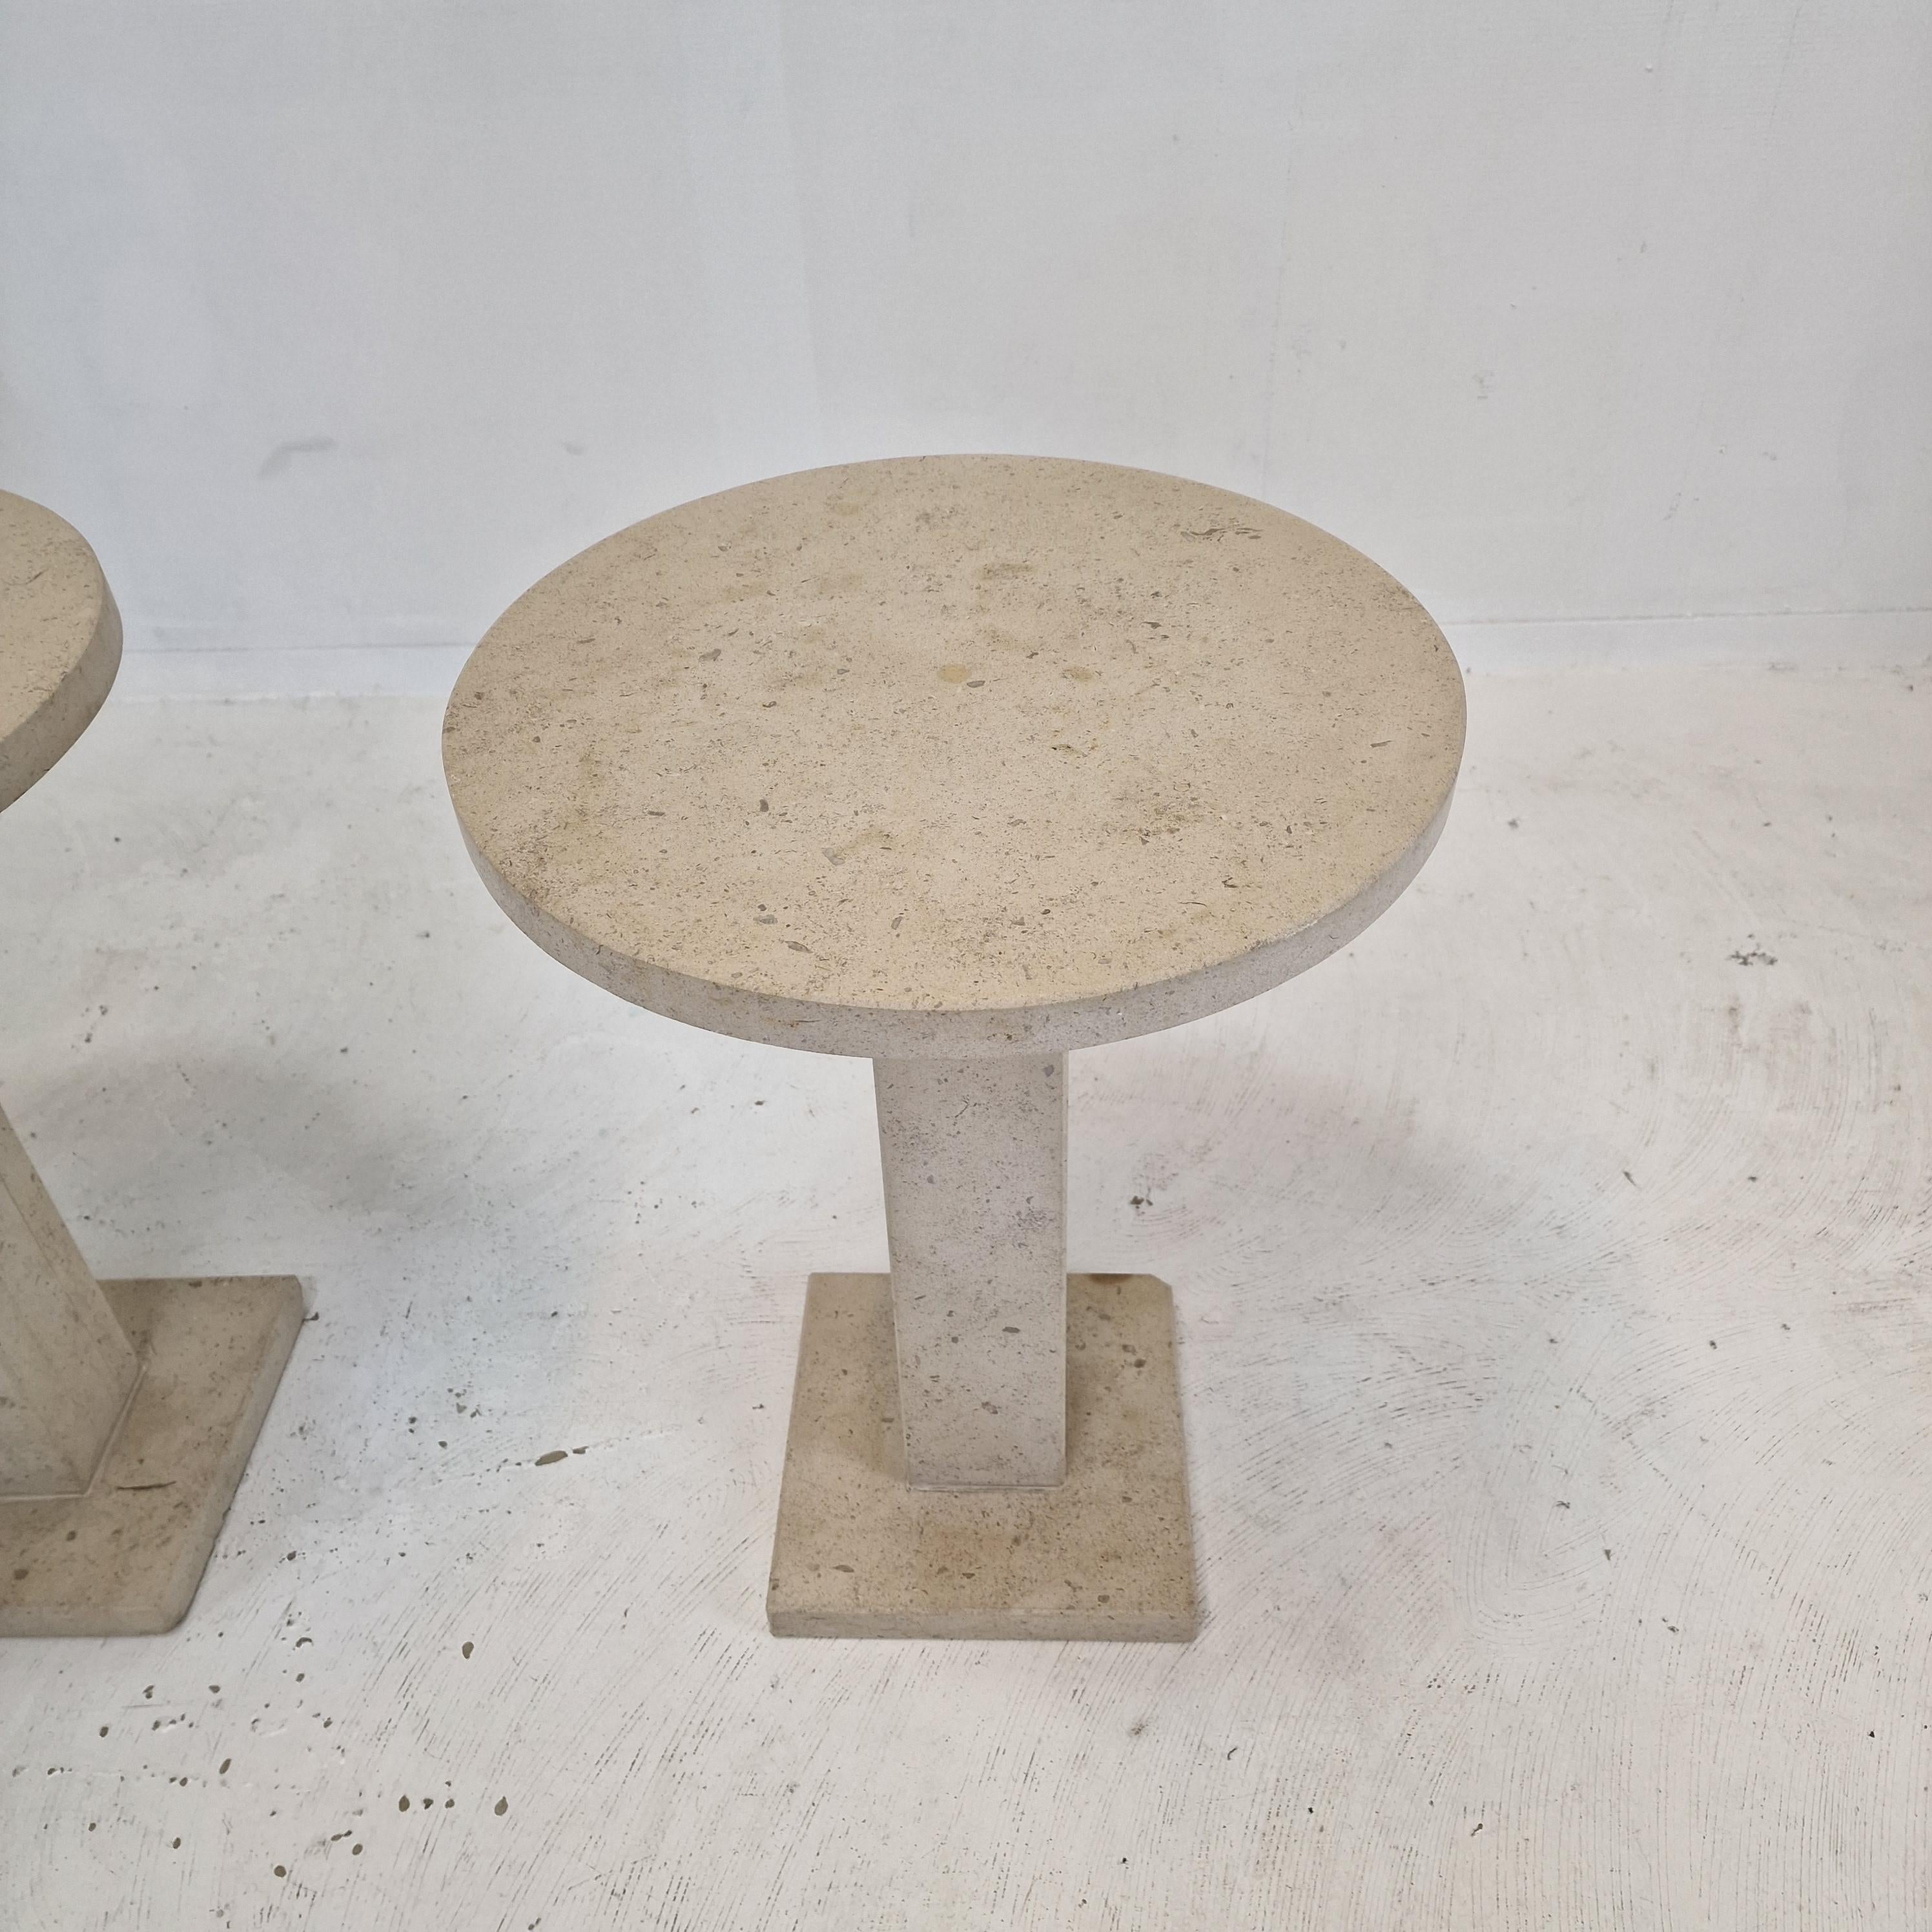 Set of 2 Italian Travertine or Stone Pedestals or Side Tables, 1980s For Sale 4